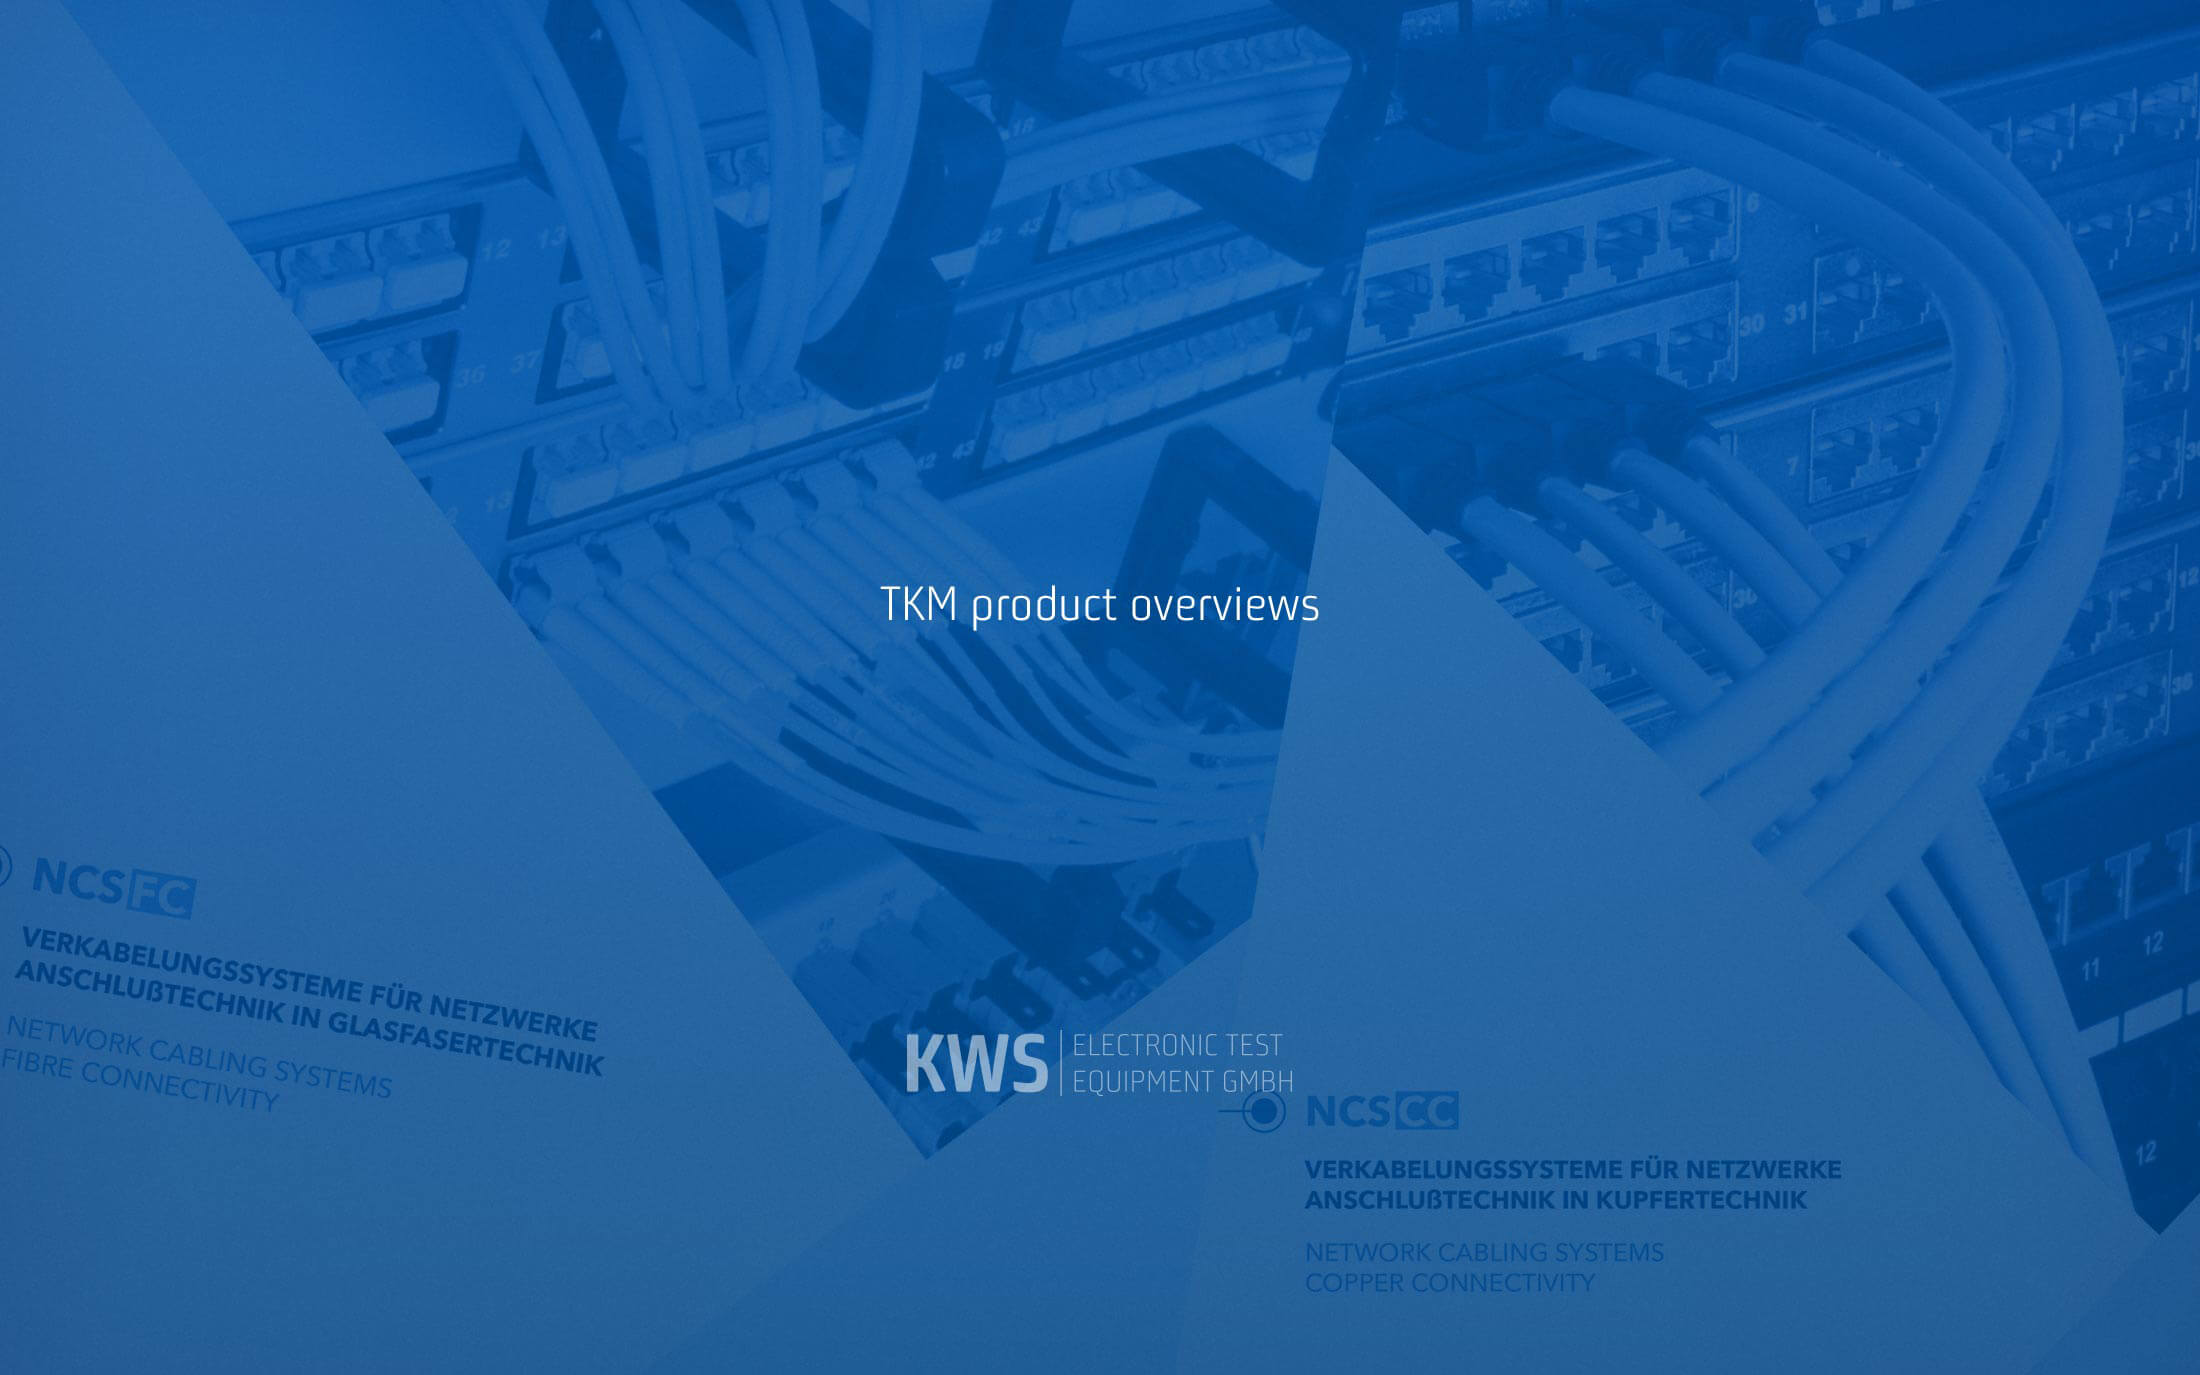 KWS Electronic News 2020: TKM product overviews always up to date